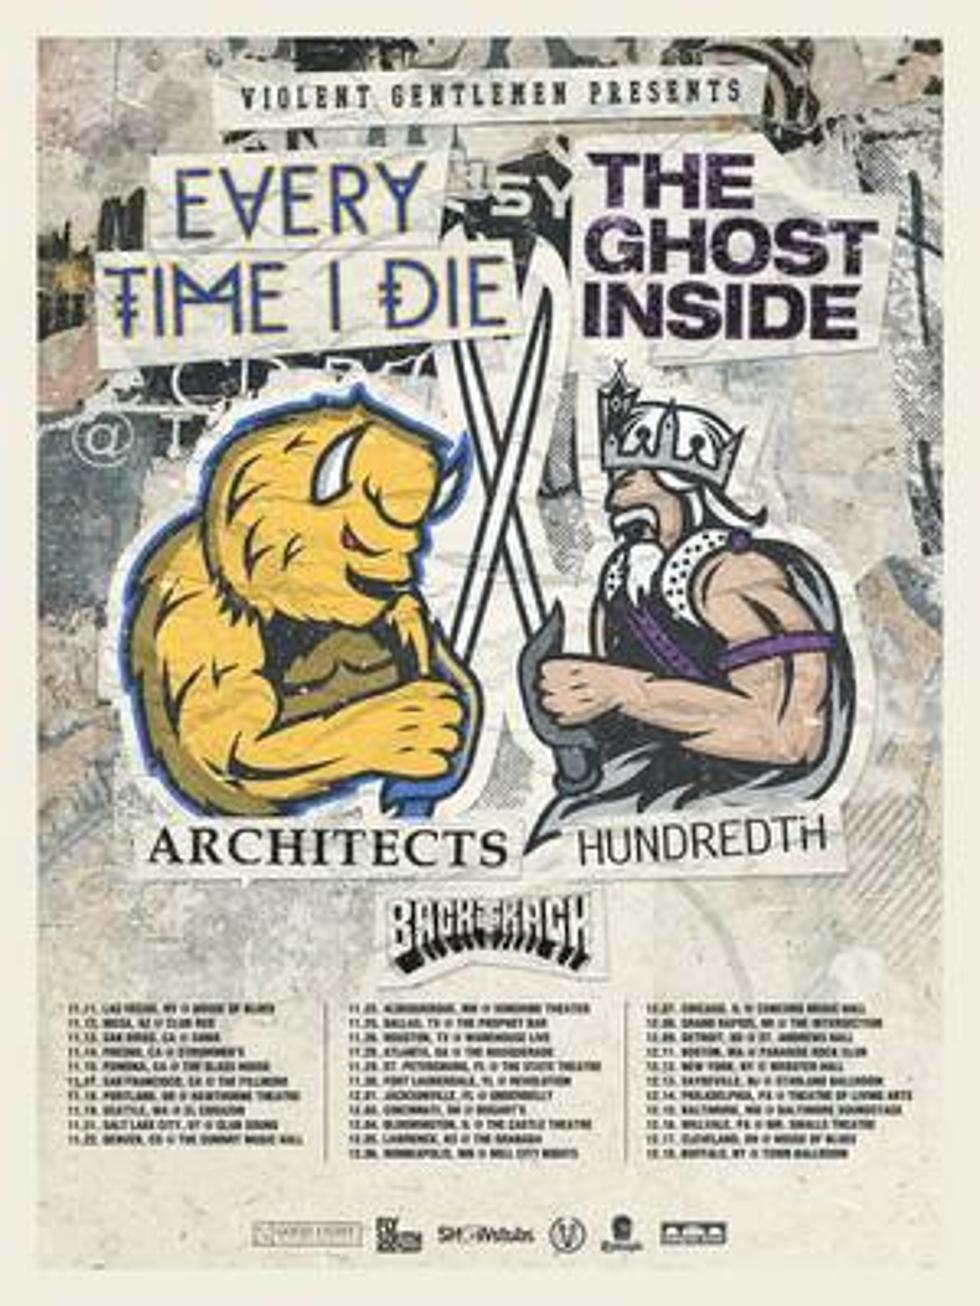 Every Time I Die + The Ghost Inside Team Up For Winter 2014 Co-Headlining Tour